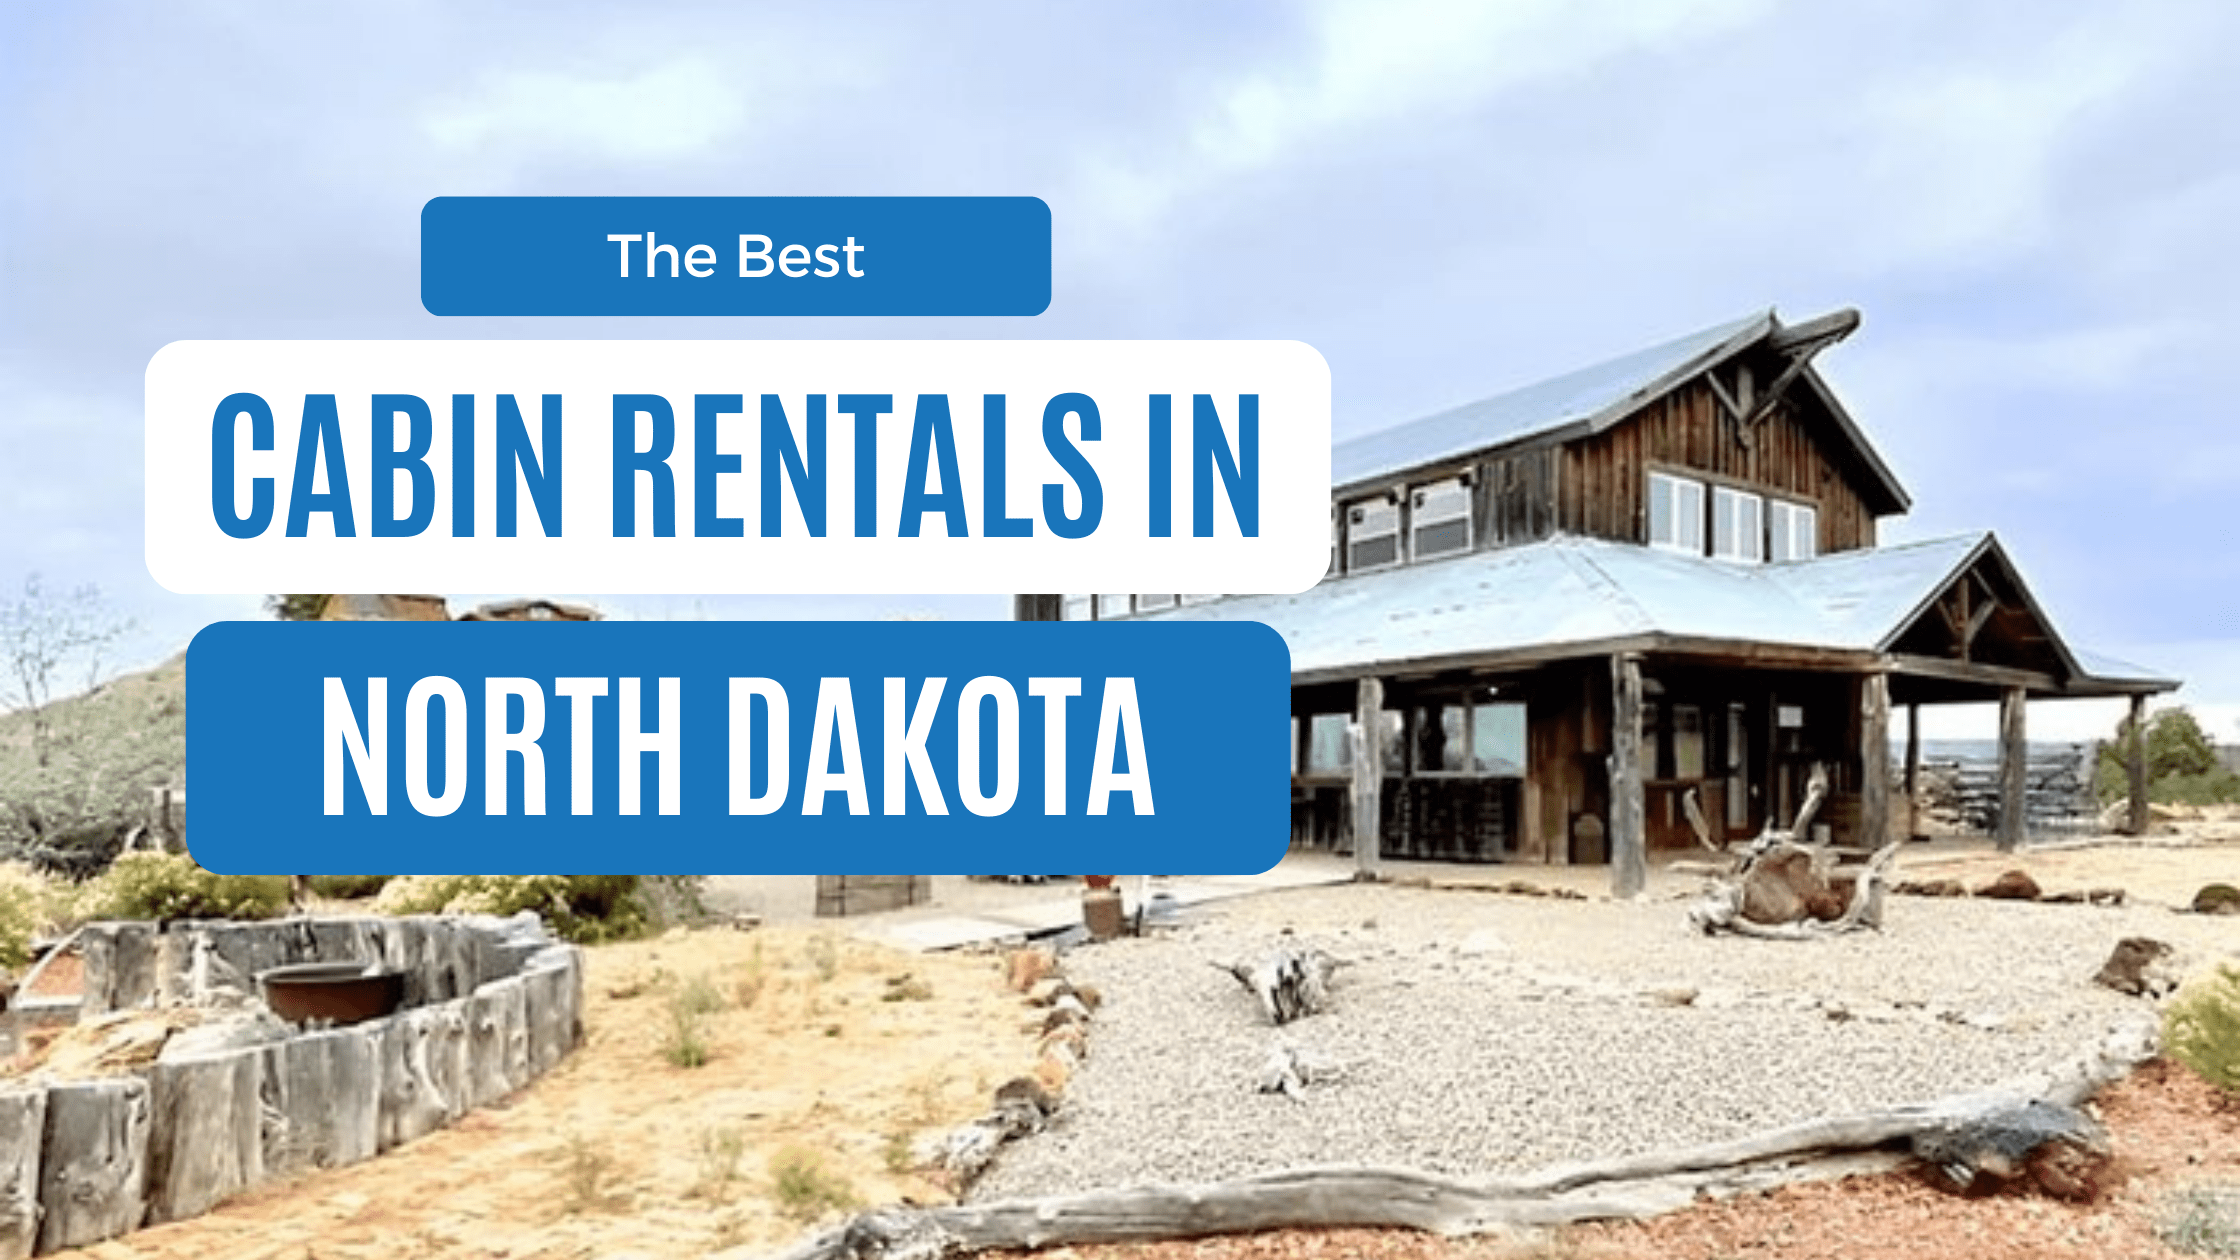 12 Of The Best Cabins In North Dakota For An Unforgettable Stay